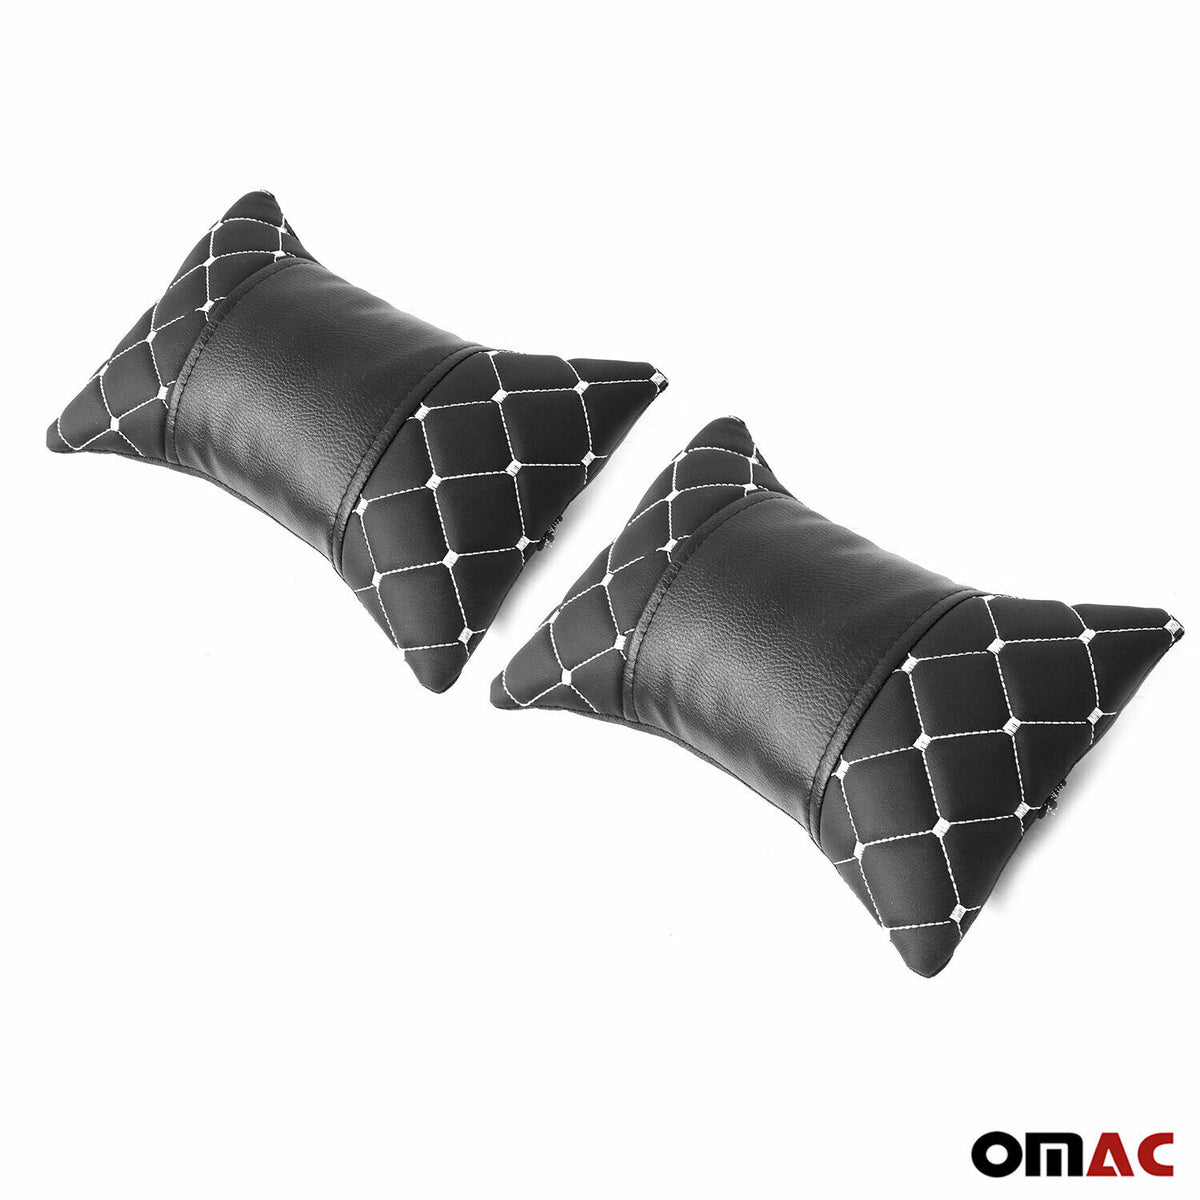 Car Headrest Pillow Neck Support Neck Pillow Leather Black White Pack of 2